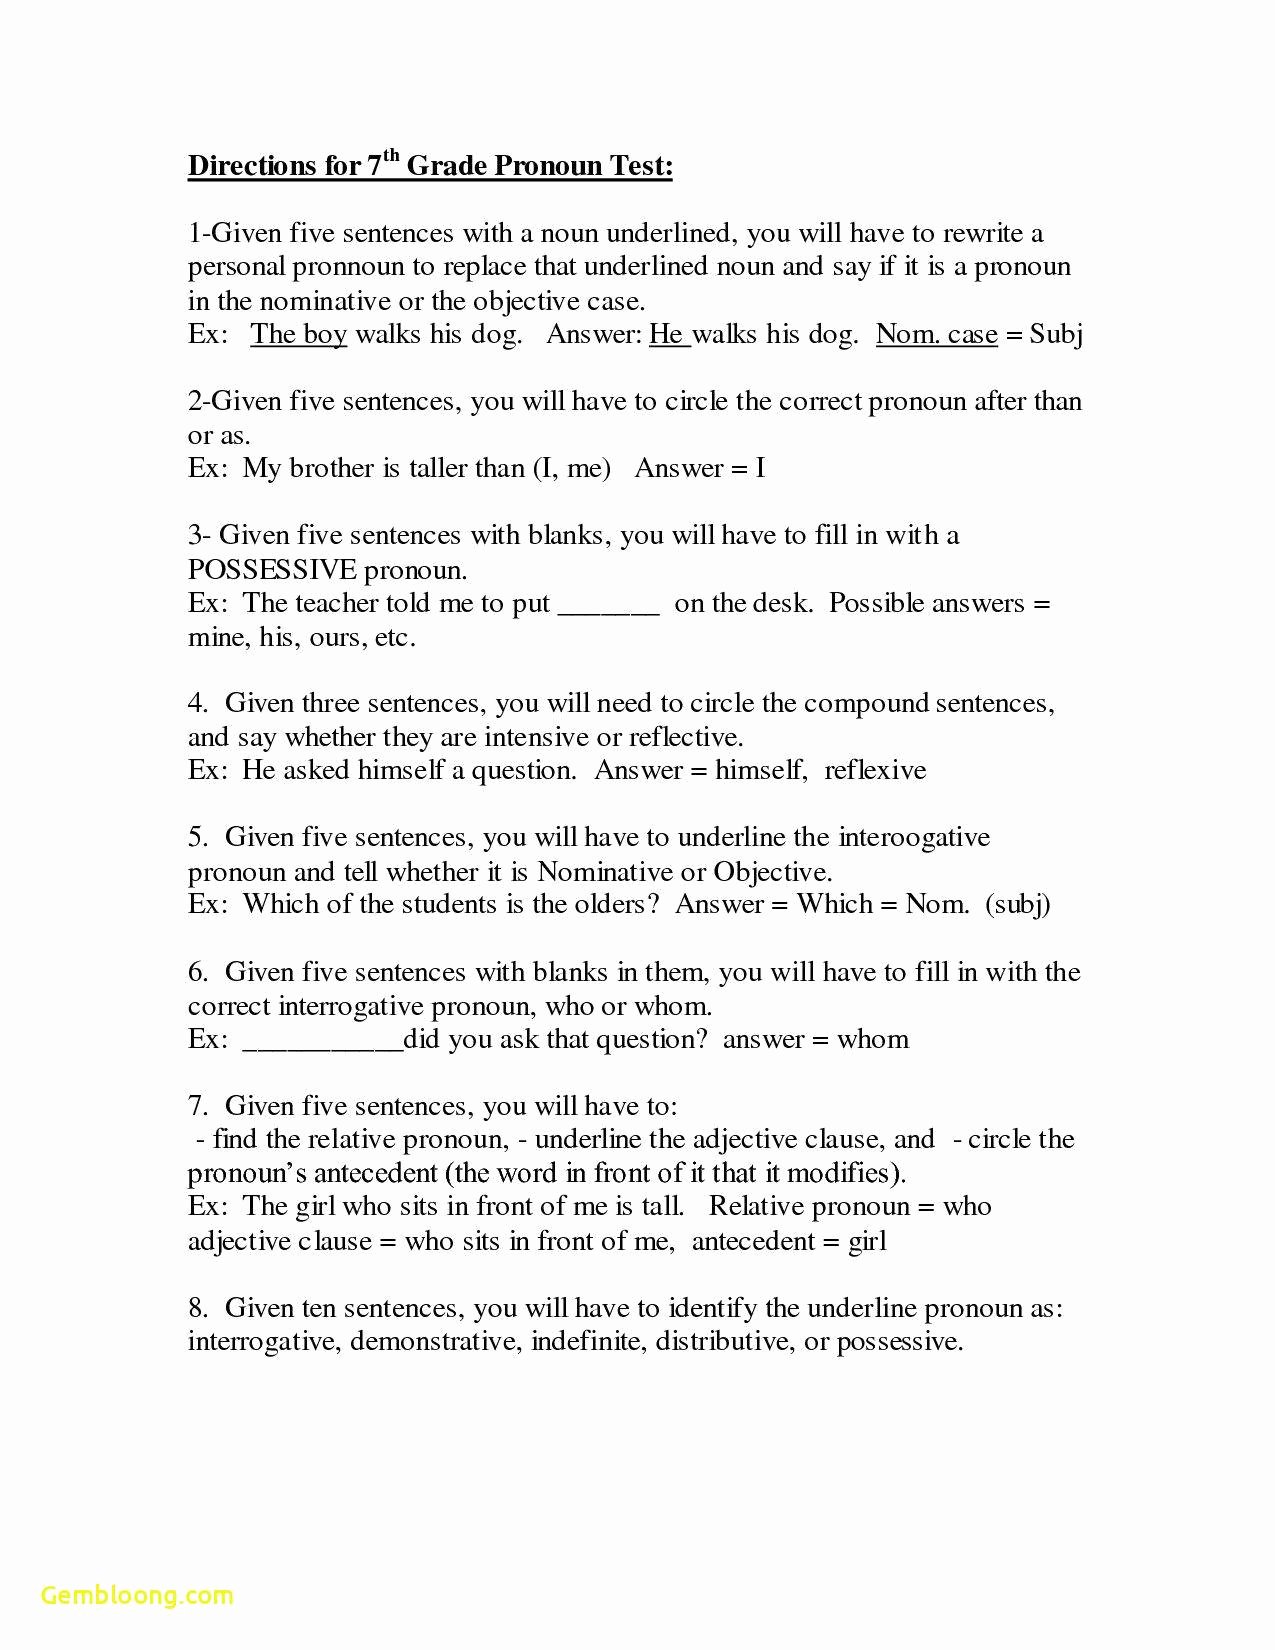 Supreme Court Cases Worksheet Answers Awesome Supreme Court Case Stu S Worksheet Answers